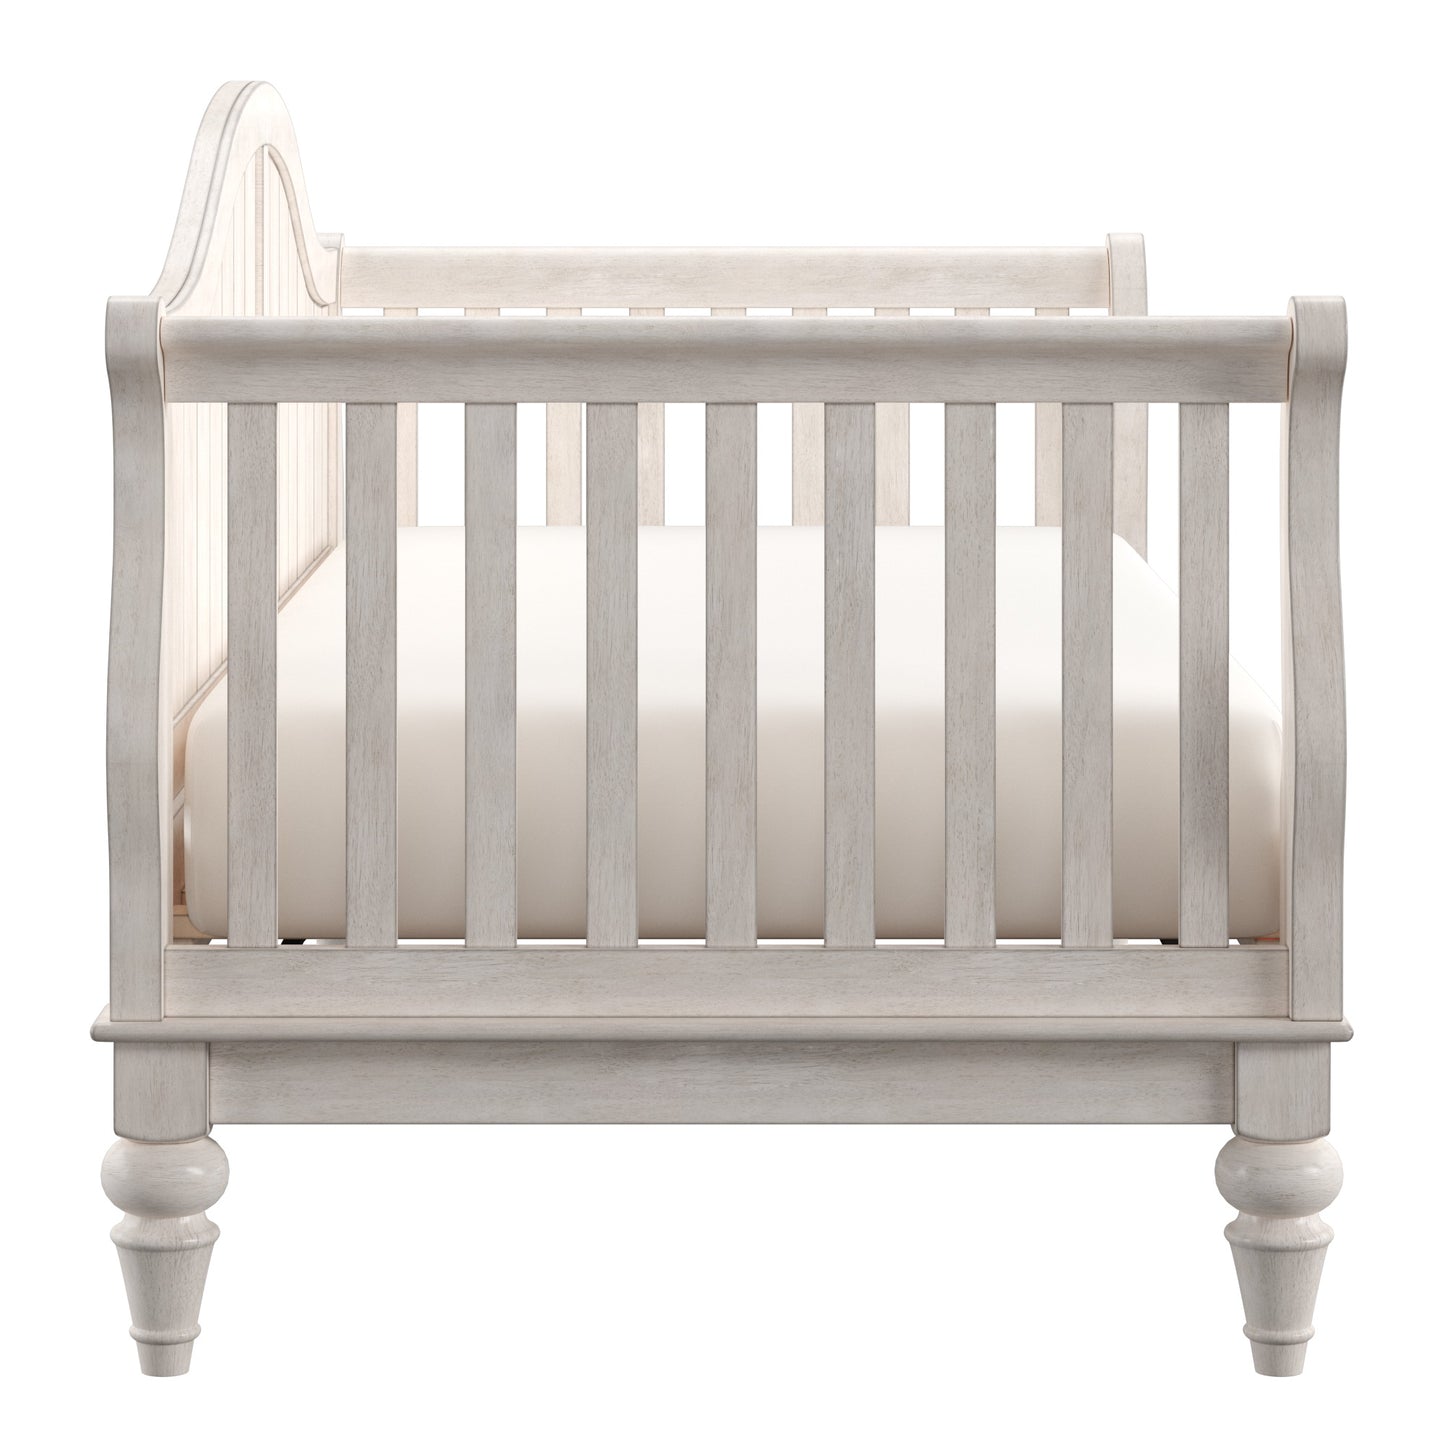 Traditional Wood Slat Daybed - Antique White, No Trundle